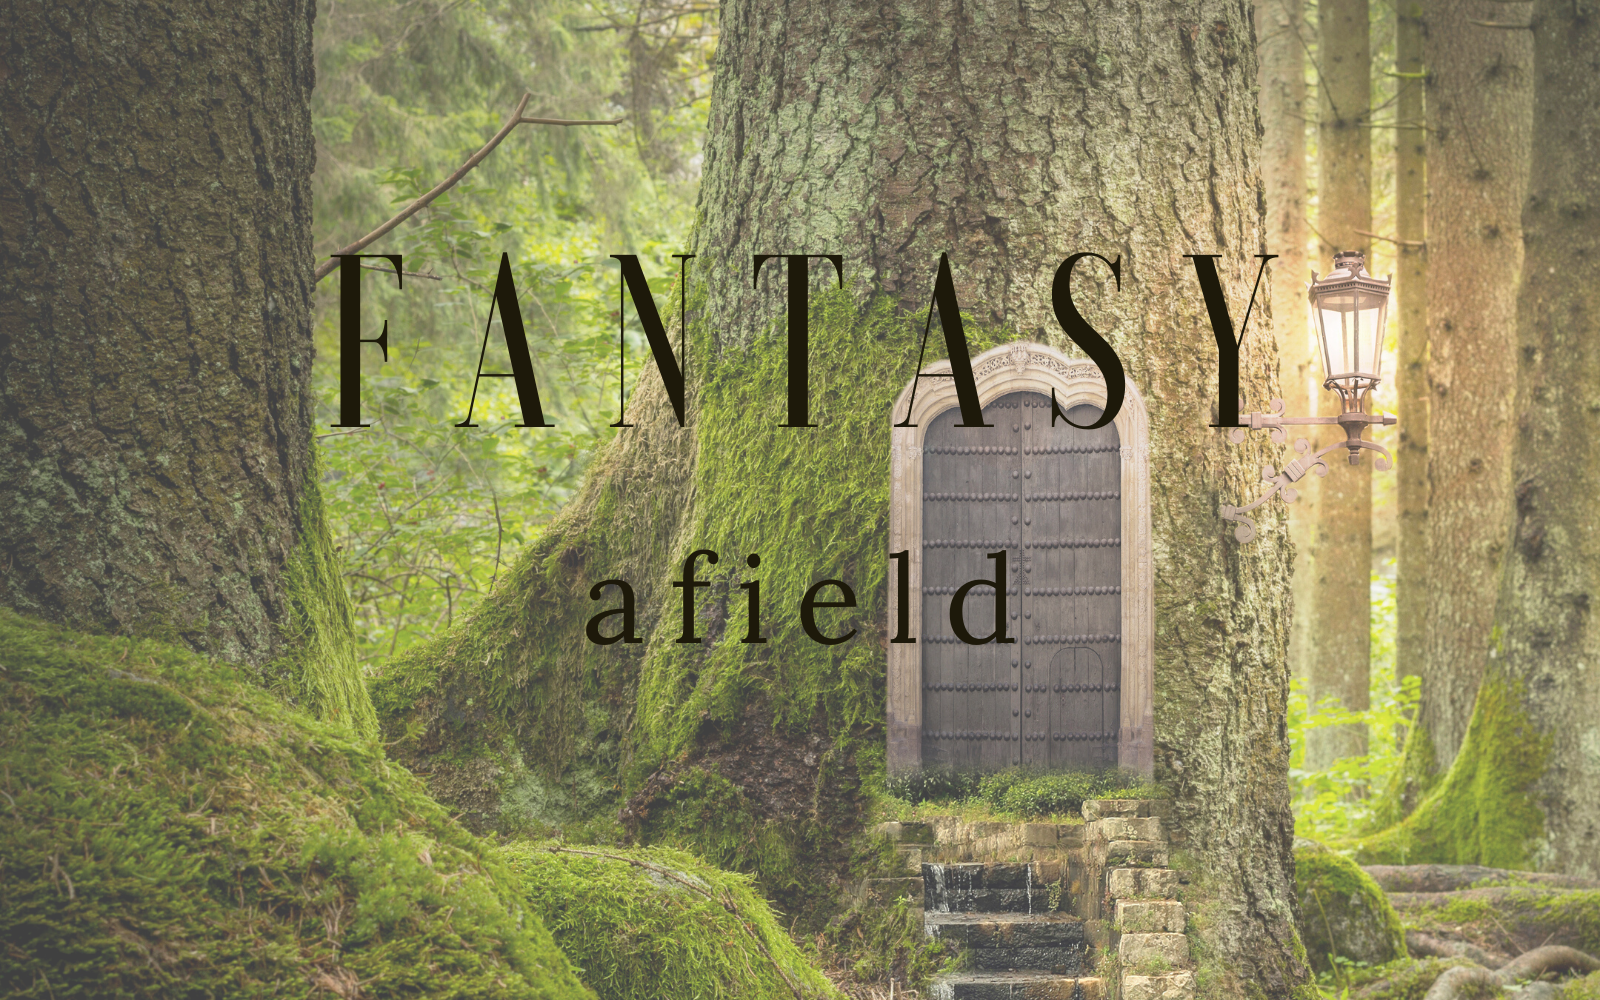 picture of a tree with a fairy door and the words fantasy afield